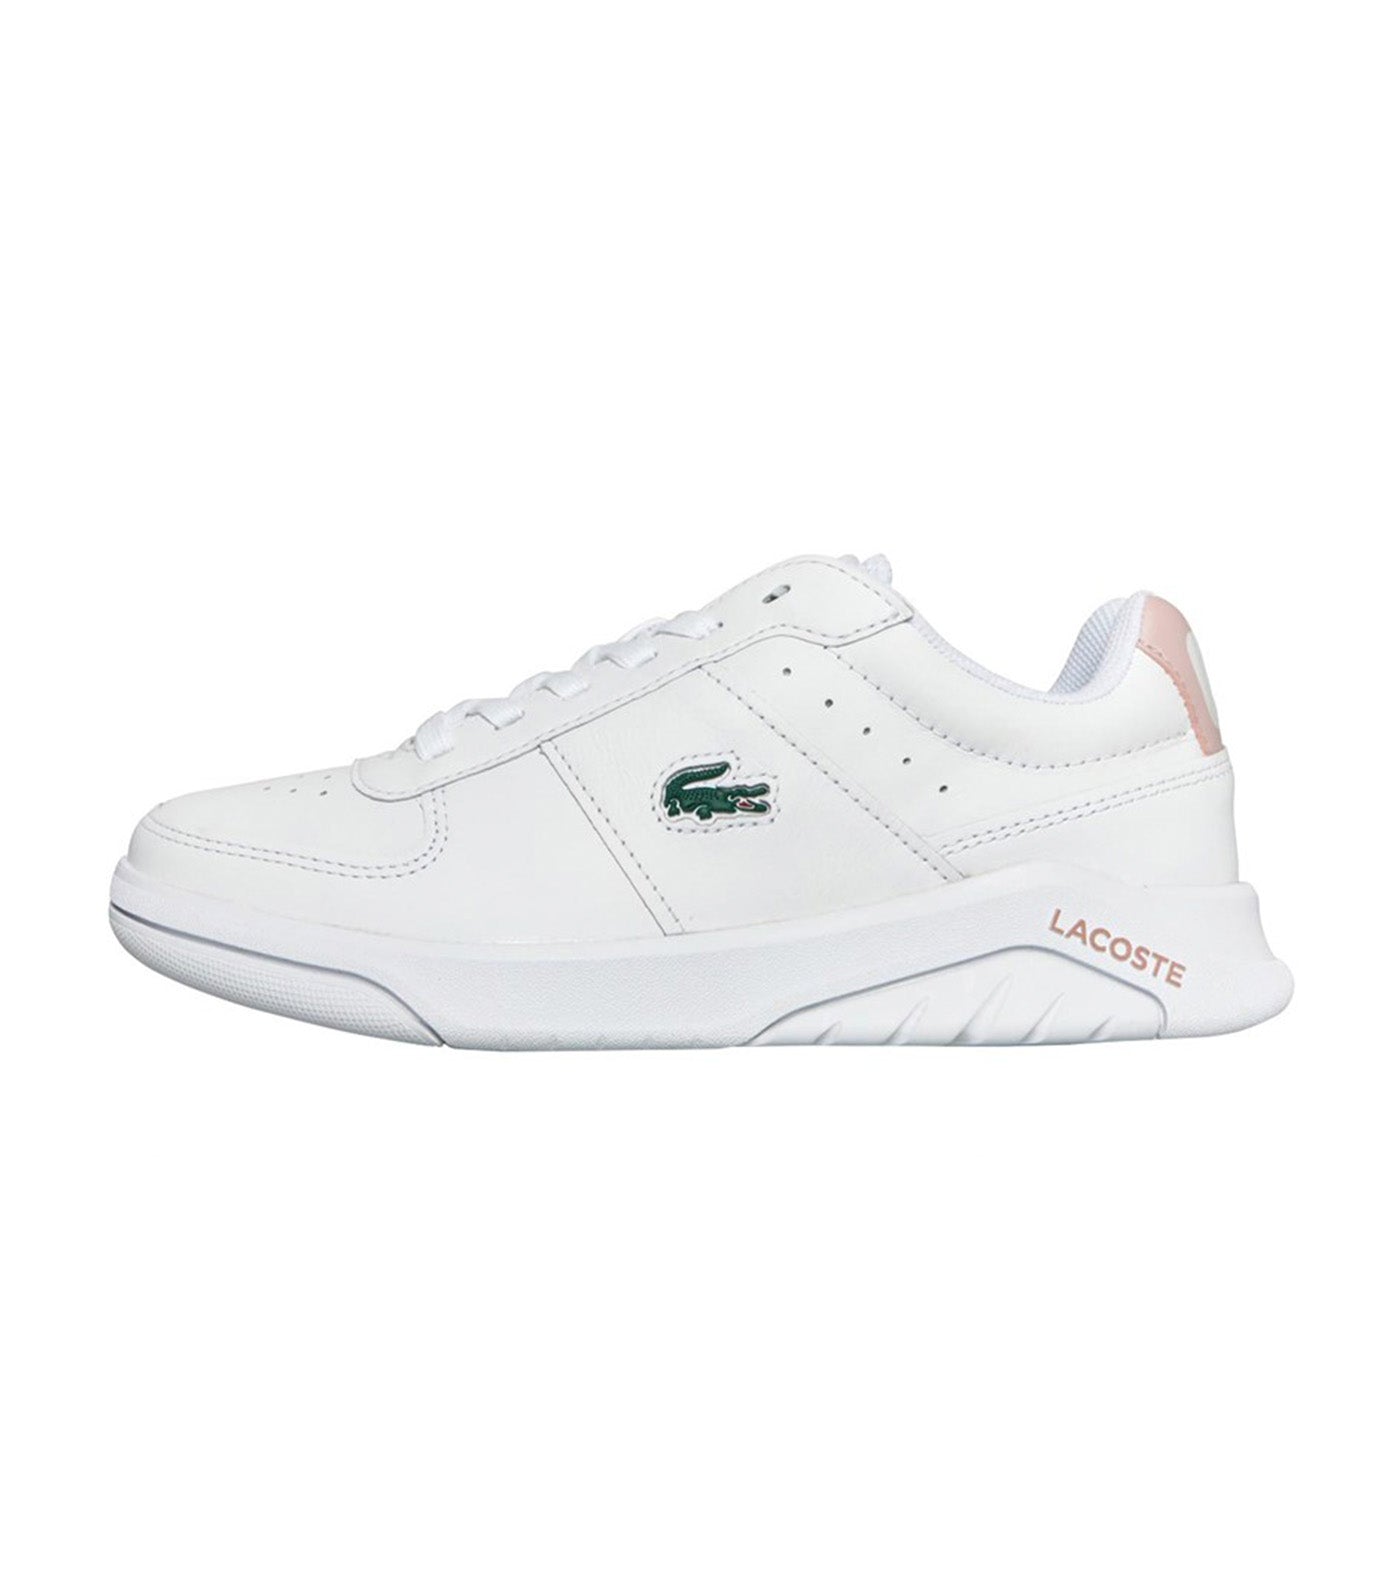 Women's Game Advance Leather Sneakers